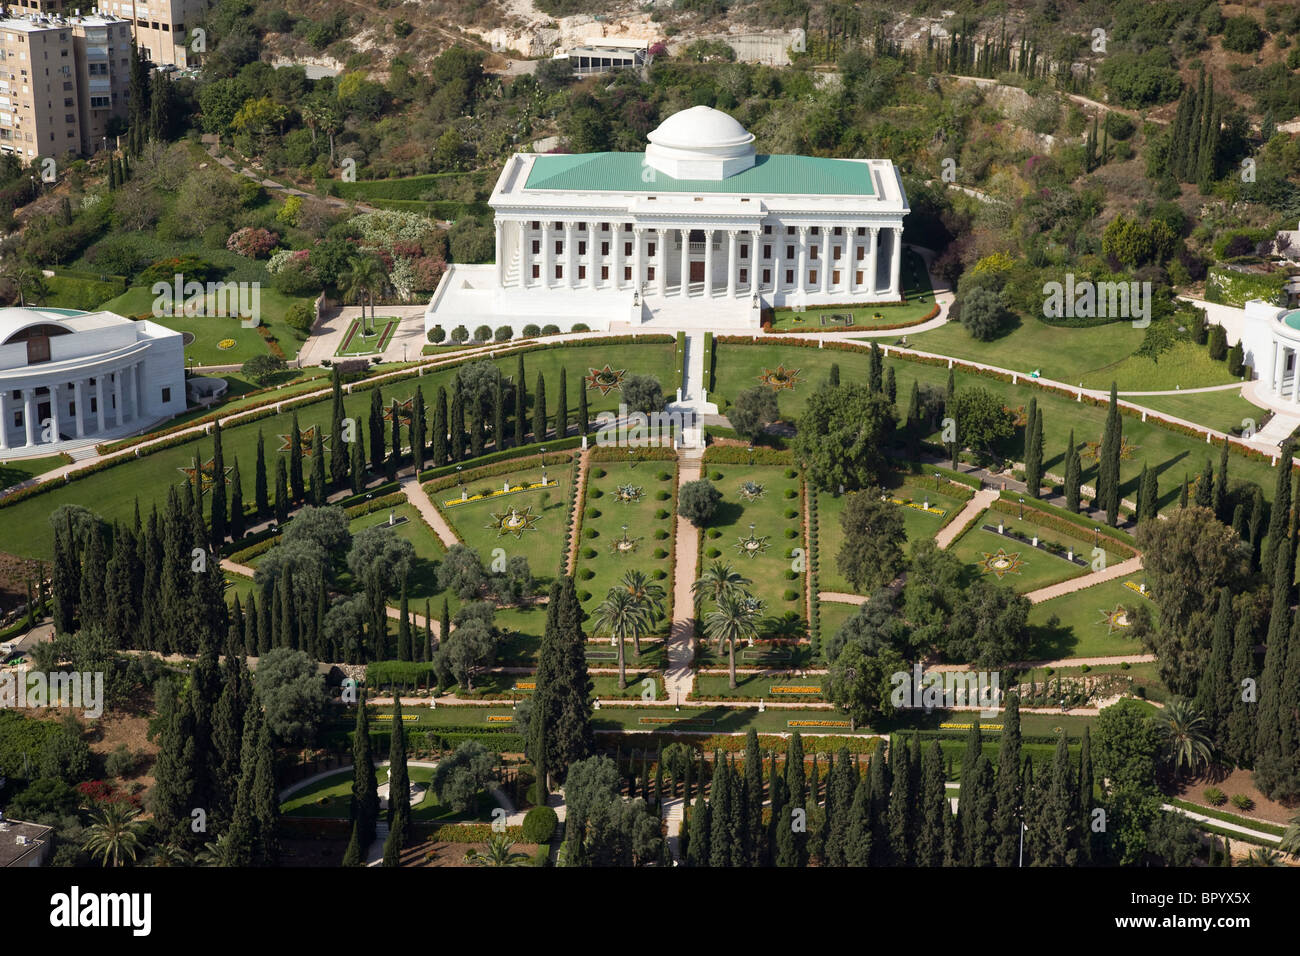 Aerial image of the Bahai gardens and temple on the slopes of the Carmel mountain Stock Photo